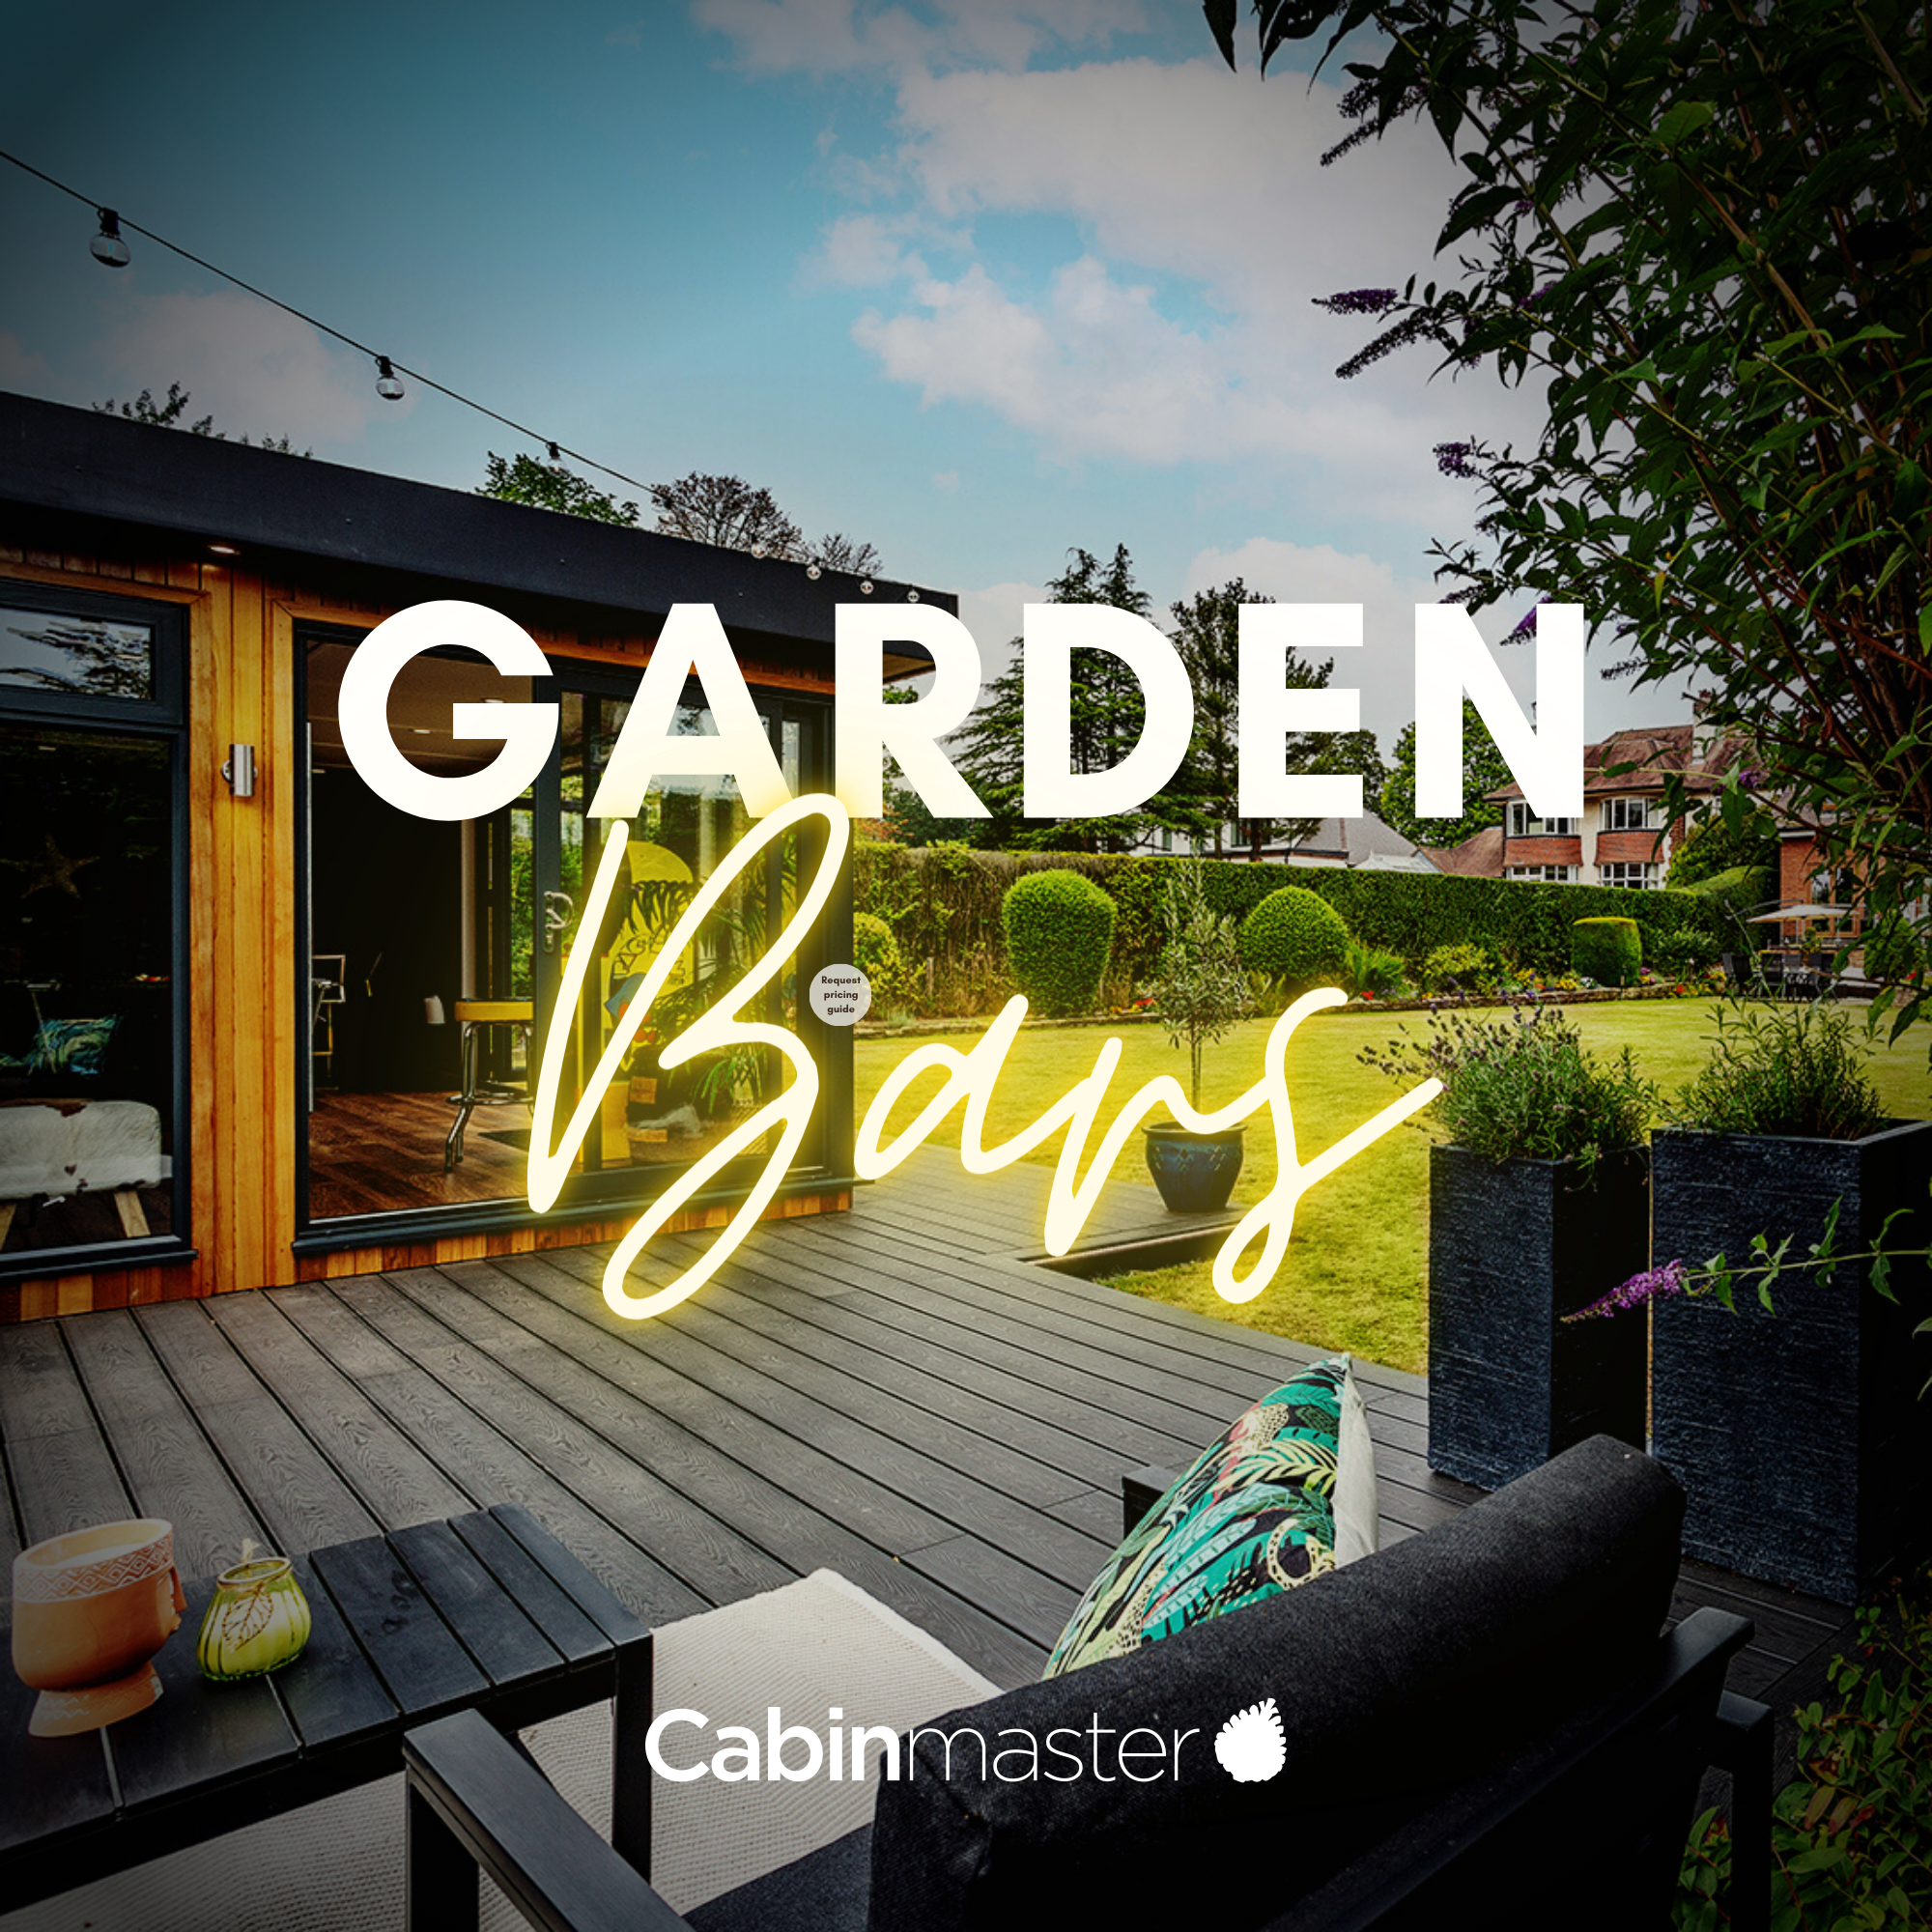 Garden bars and man caves by Cabin Master